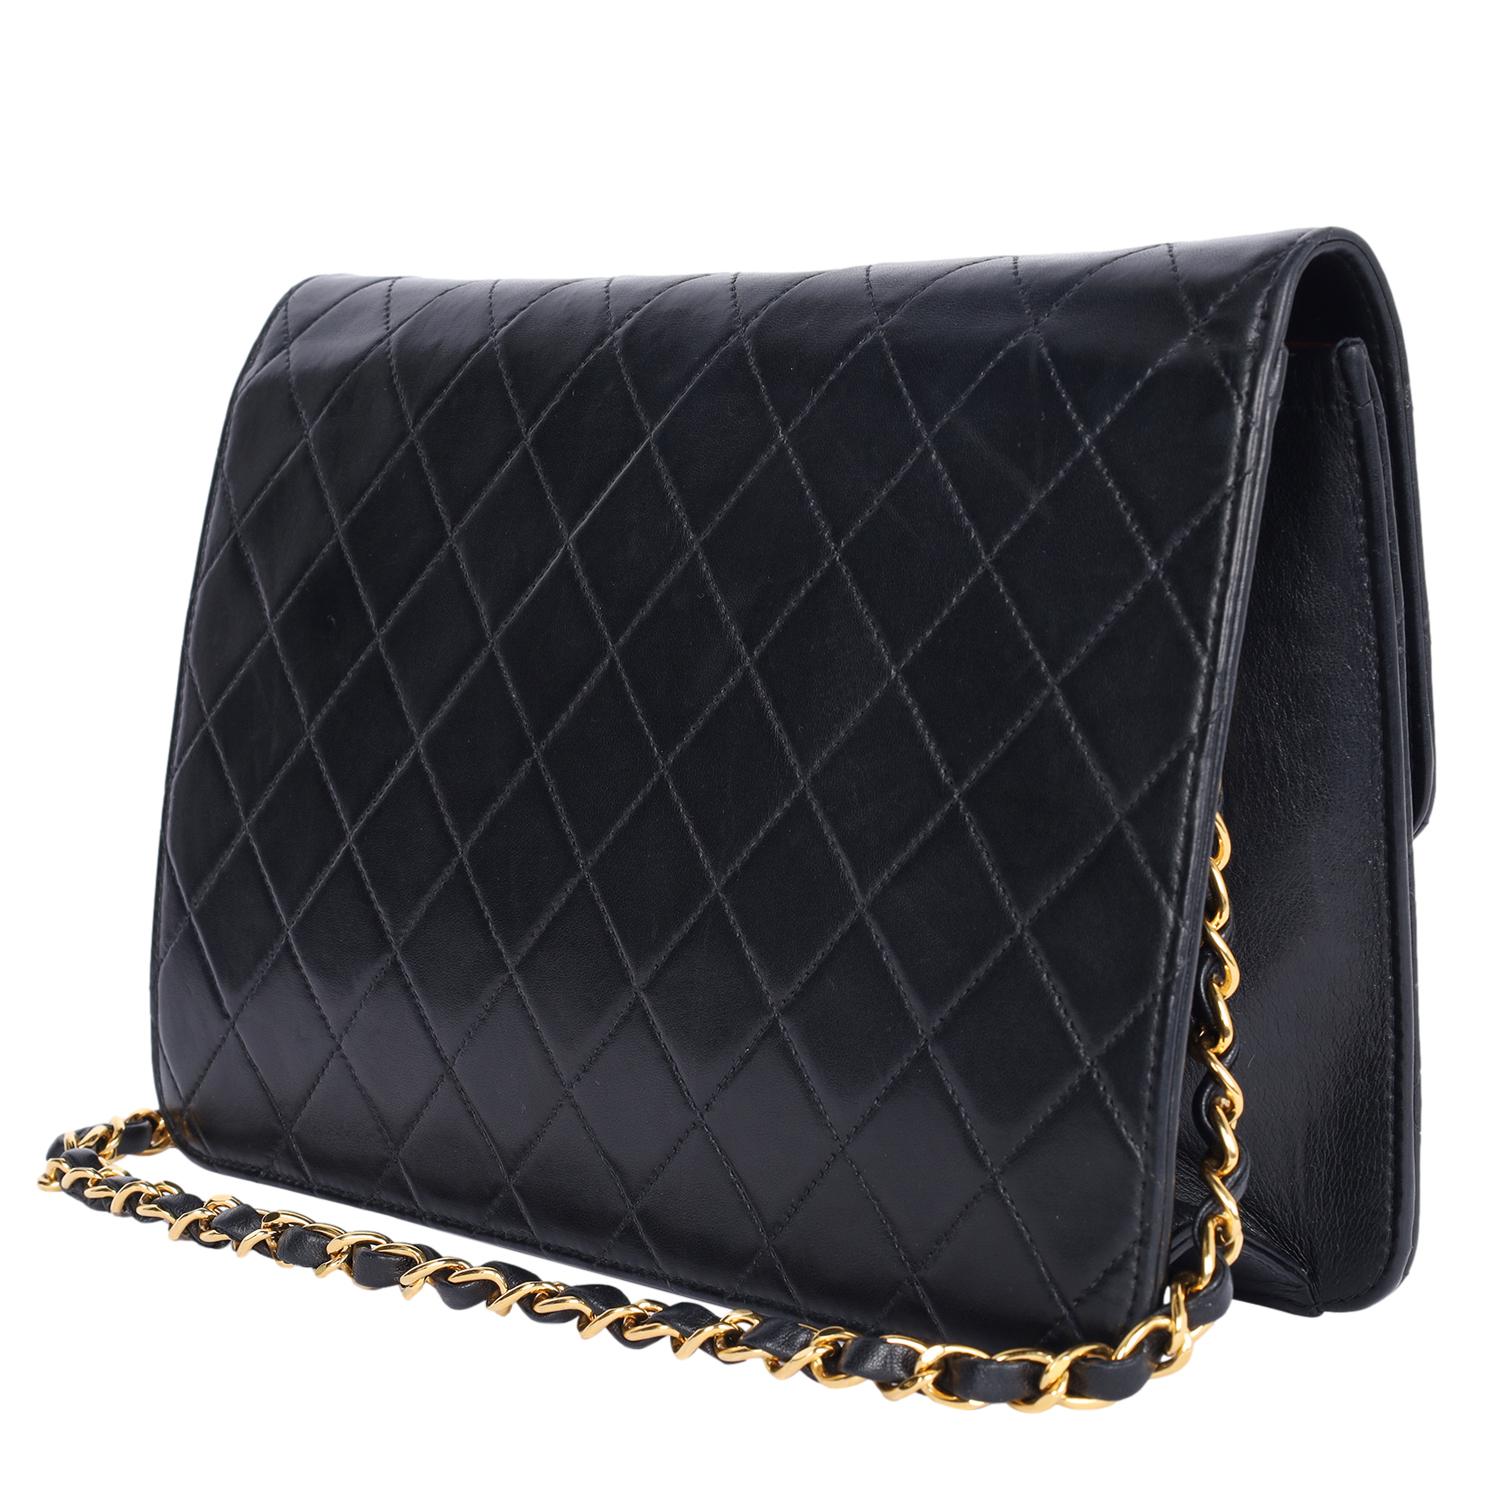 Chanel Black Classic Front Flap Quilted Leather Shoulder Bag For Sale 3